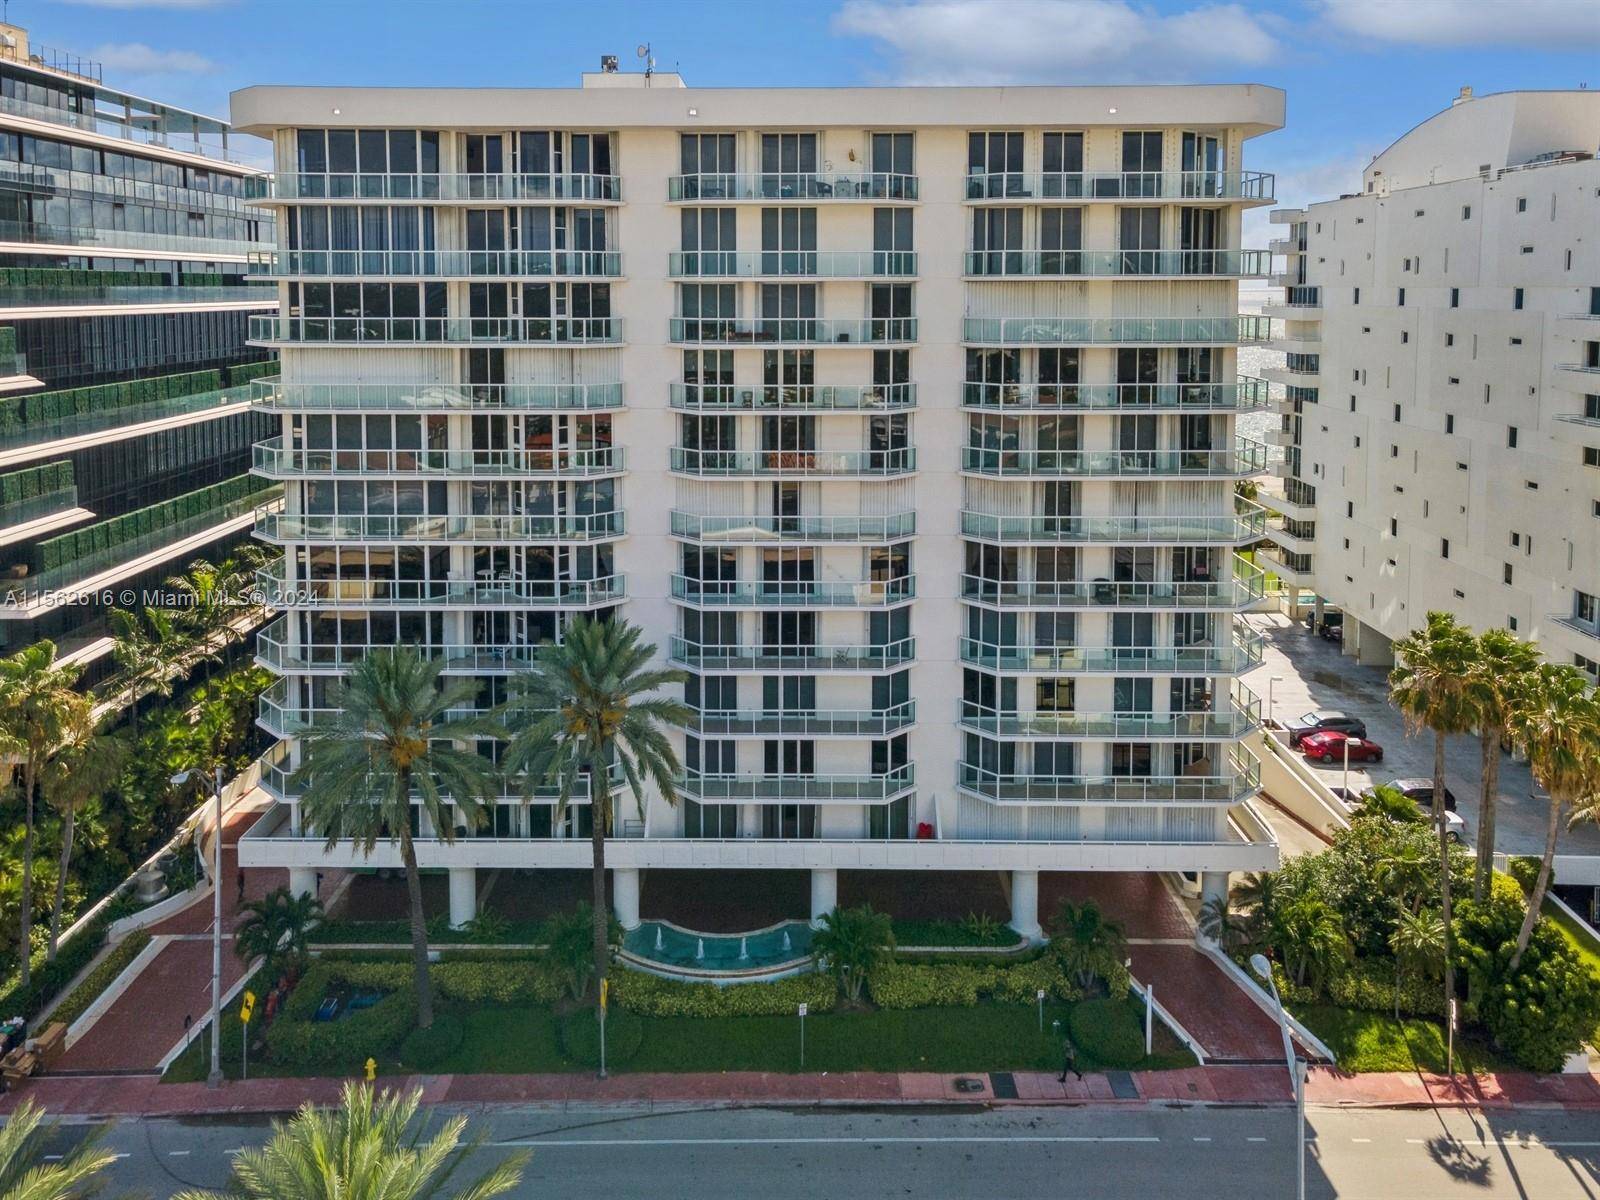 DIRECT OCEAN VIEW in luxurious beachfront building, NE corner residence located in The Mirage.